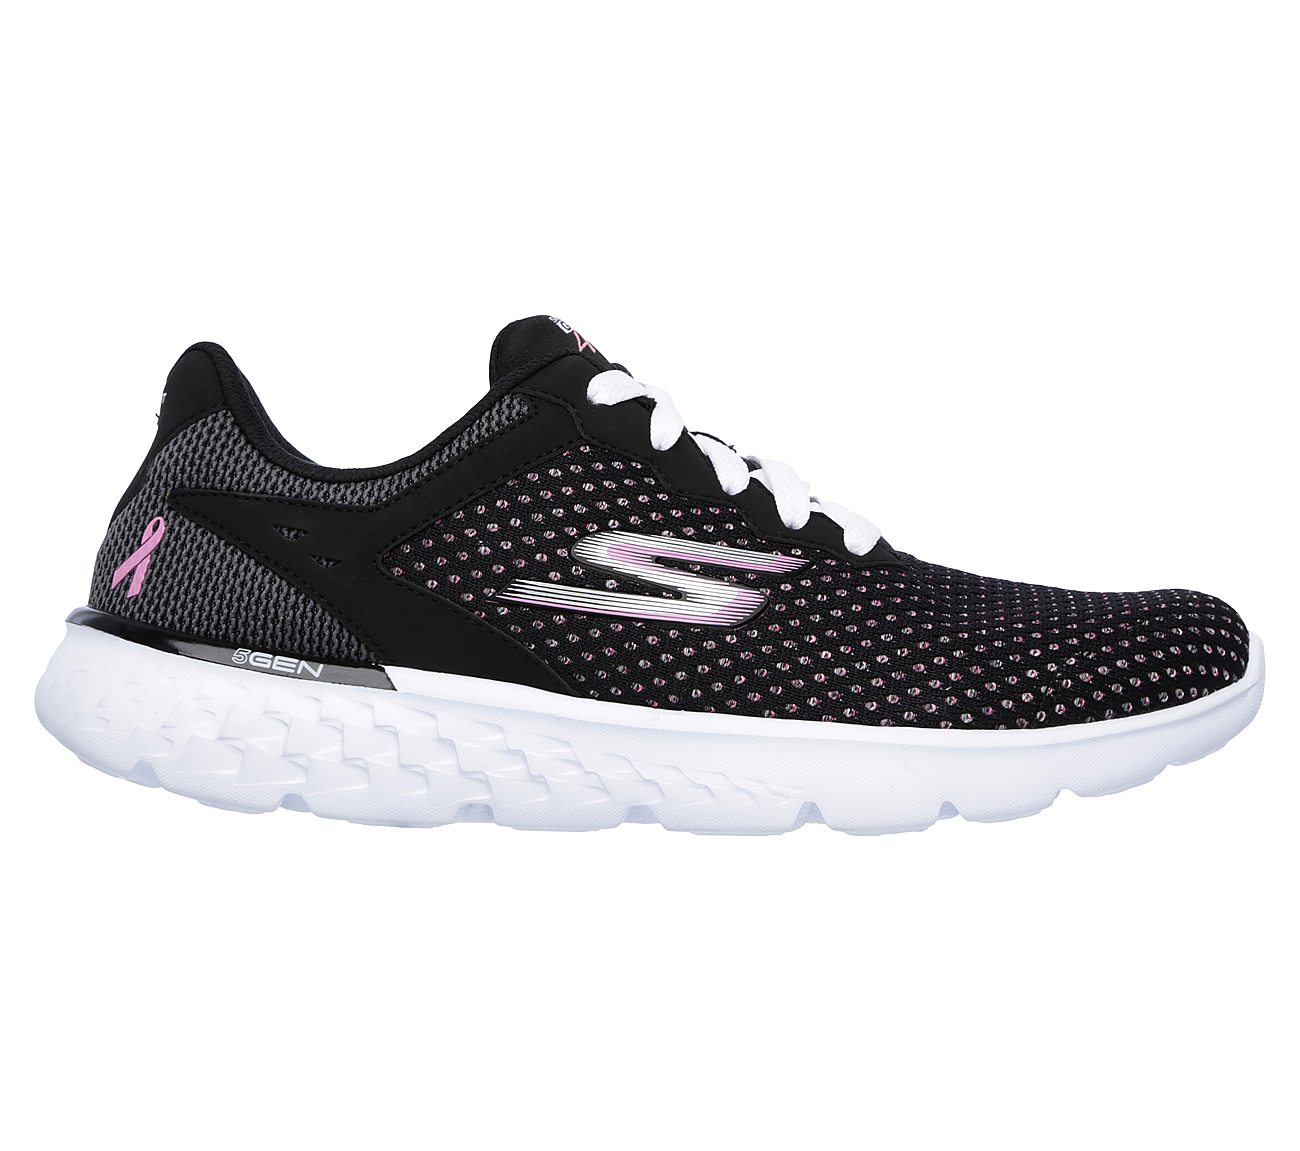 skechers breast cancer shoes Sale,up to 